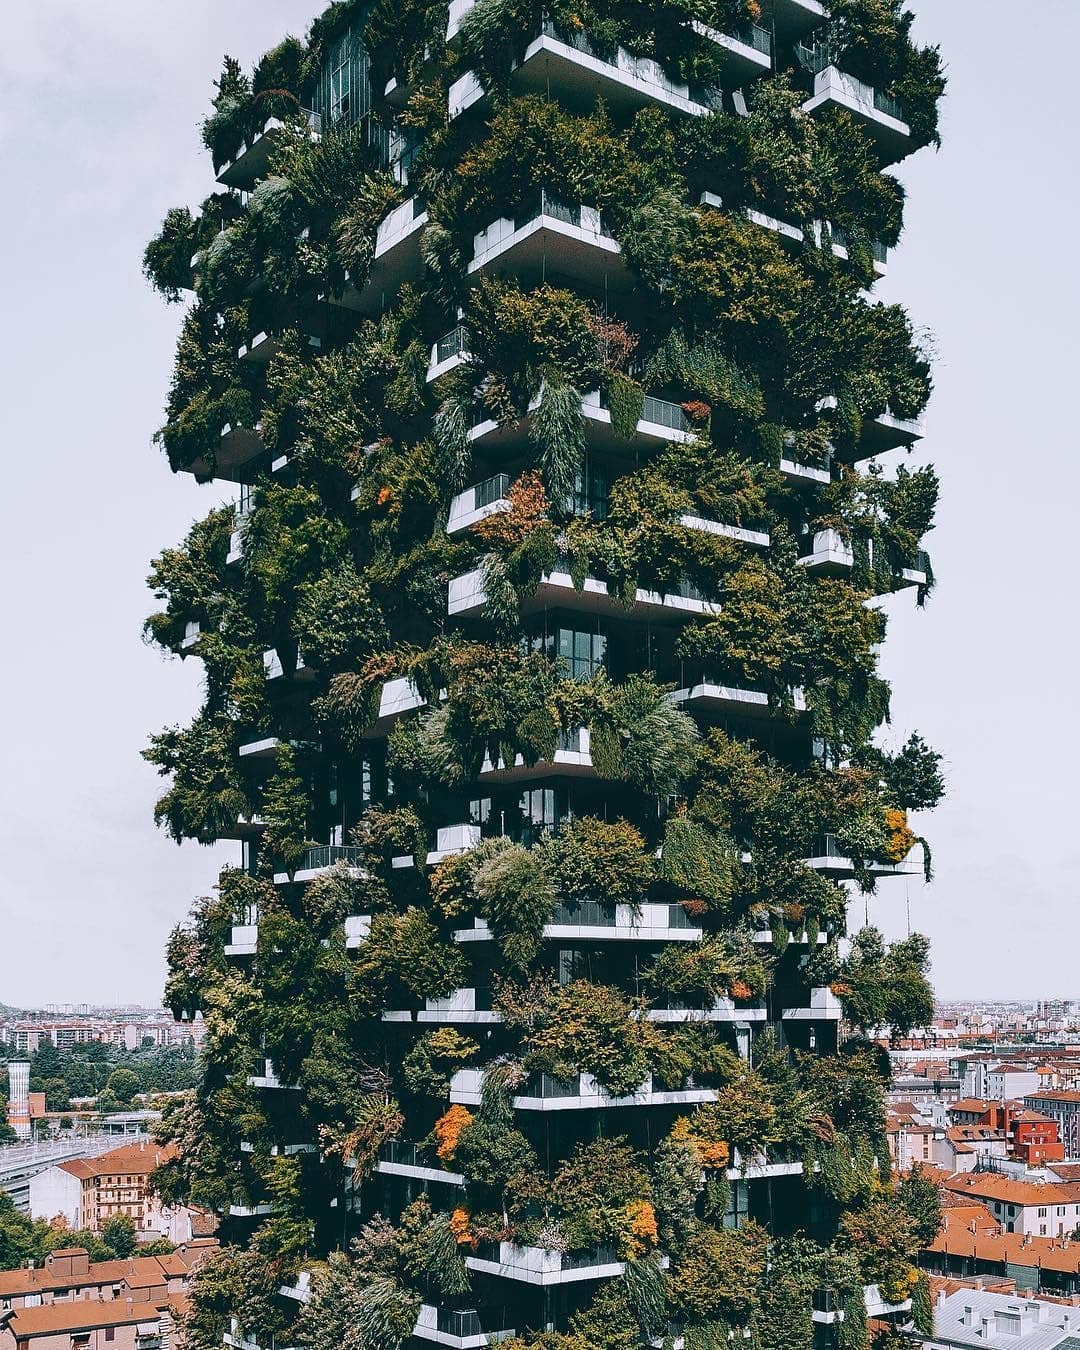 a project for metropolitan reforestation contributing to the regeneration of the environment and urban biodiversity without the implication of expanding the city upon the territory. It is a model of vertical densification of nature within the city that operates in relation to policies for reforestation and naturalisation of large urban and metropolitan borders.